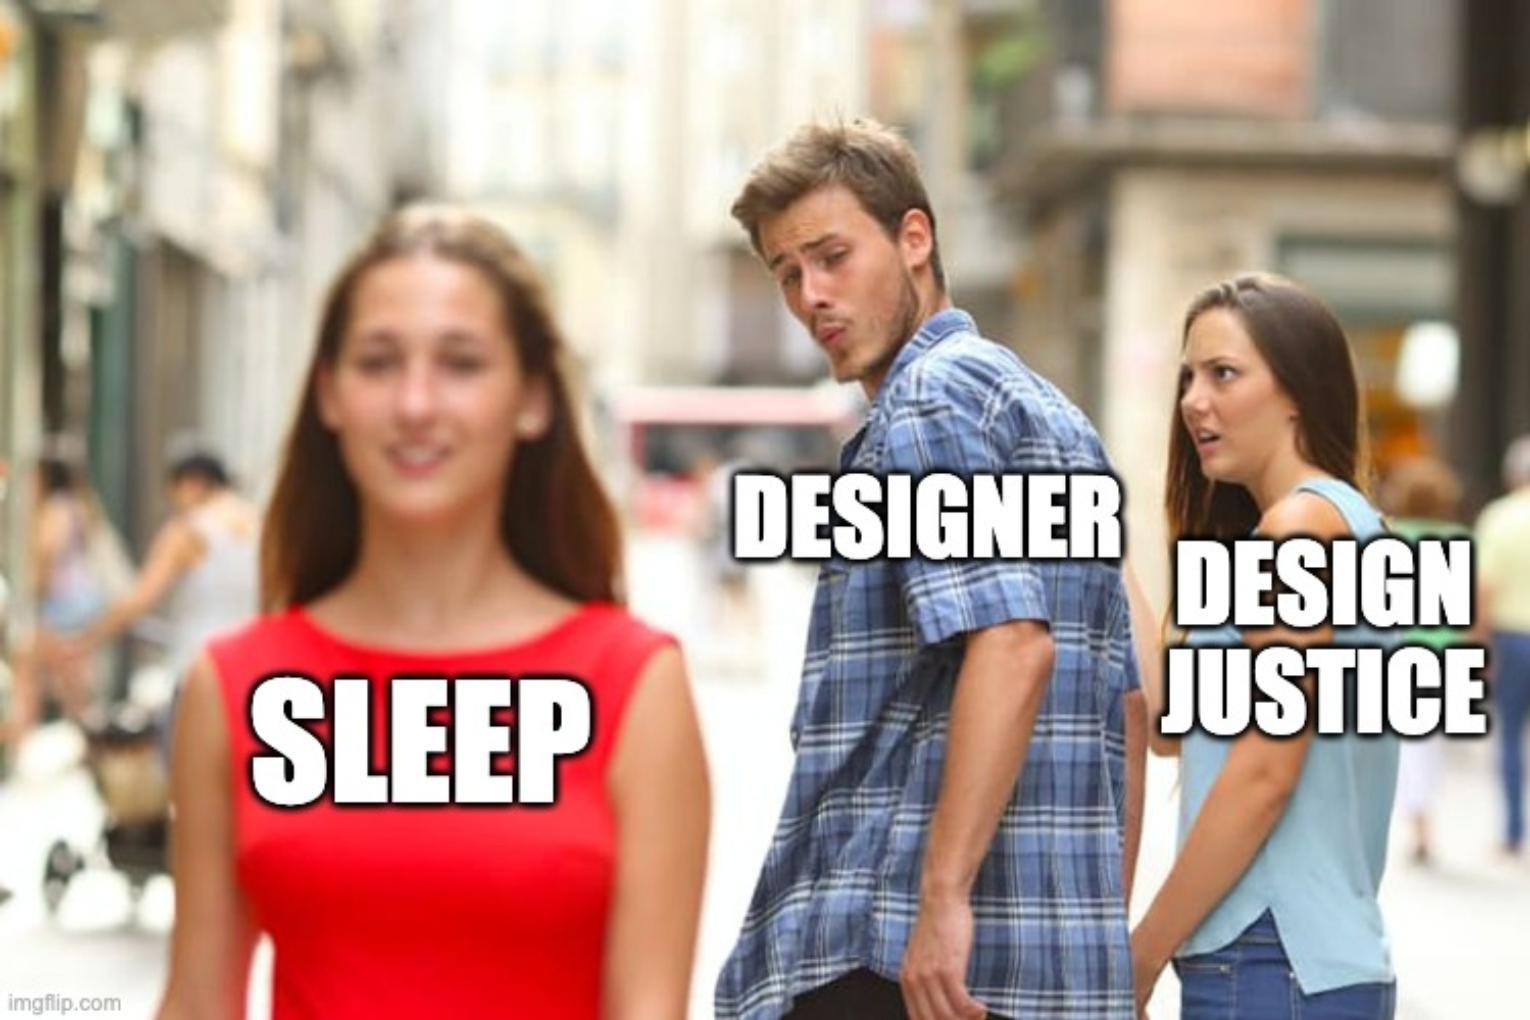 In the paradox of trying to be a critical designer, I tried using memes to move past hopelessness and find connection.